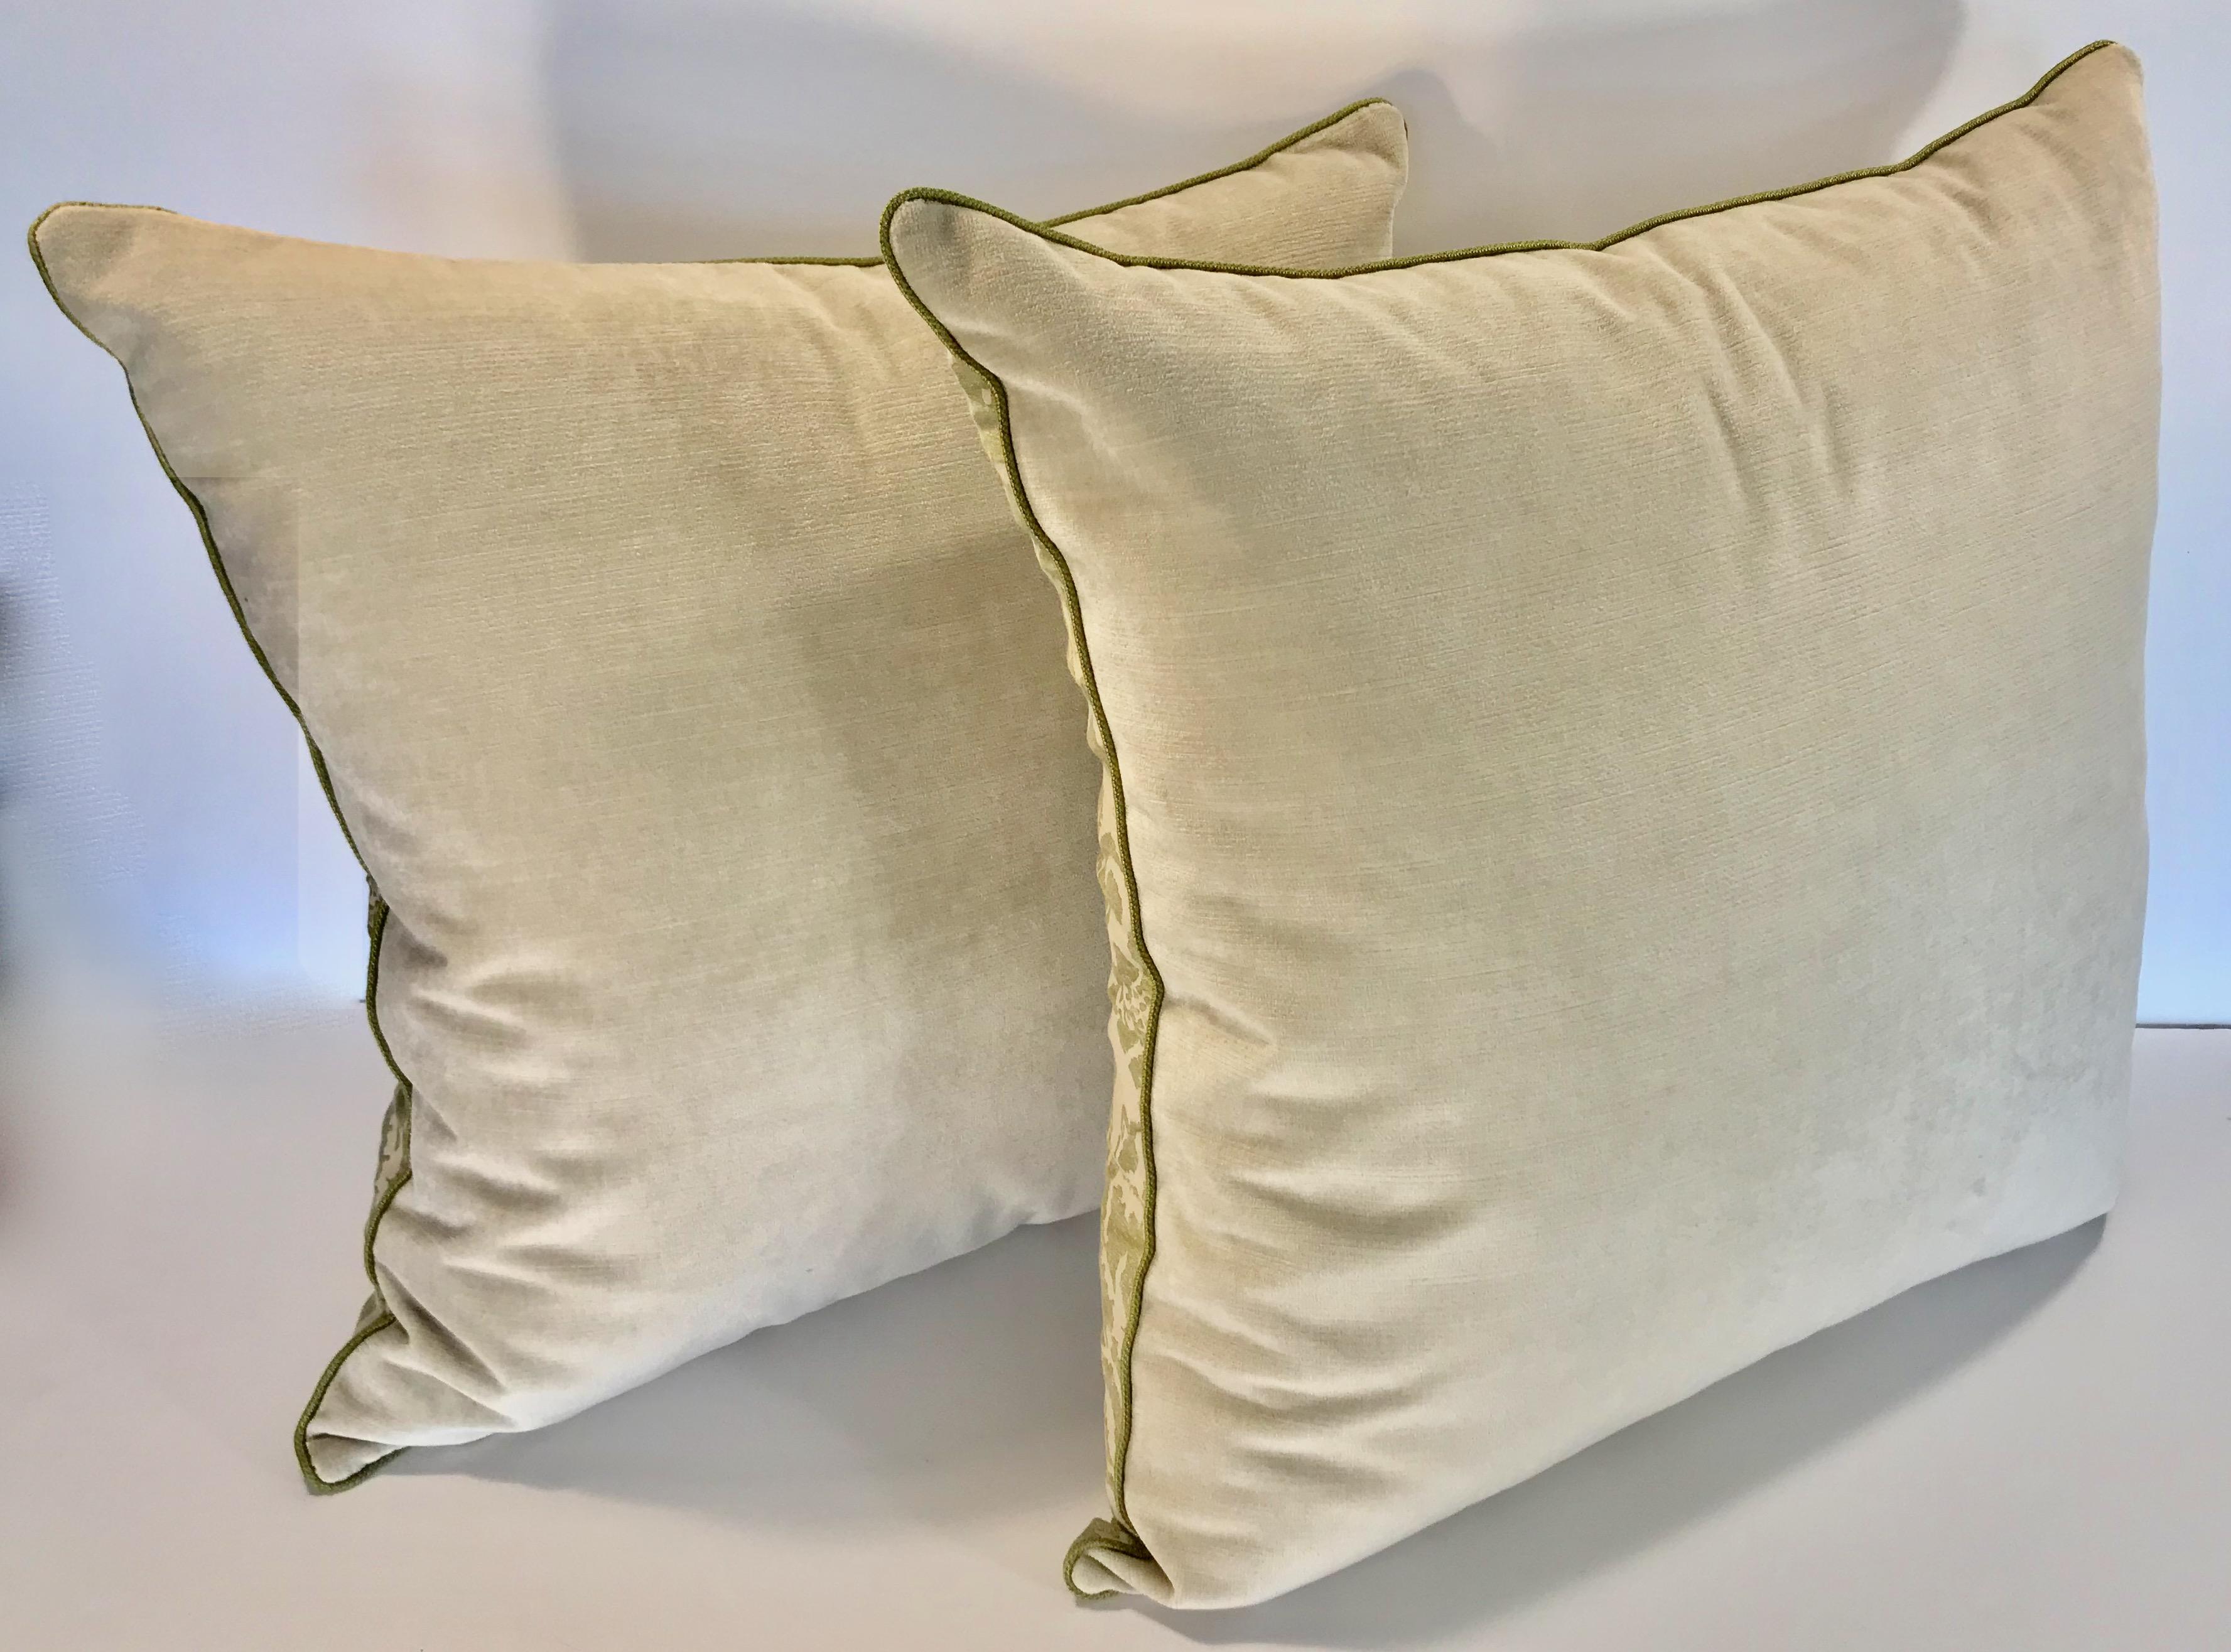 Beautiful pair of custom throw pillows crafted with vintage Mariano Fortuny cotton fabric in the Corone pattern. Linen blend velvet back with a coordinating green micro cord. 80/20 down blend feather inserts are overstuffed to 40 ounces.